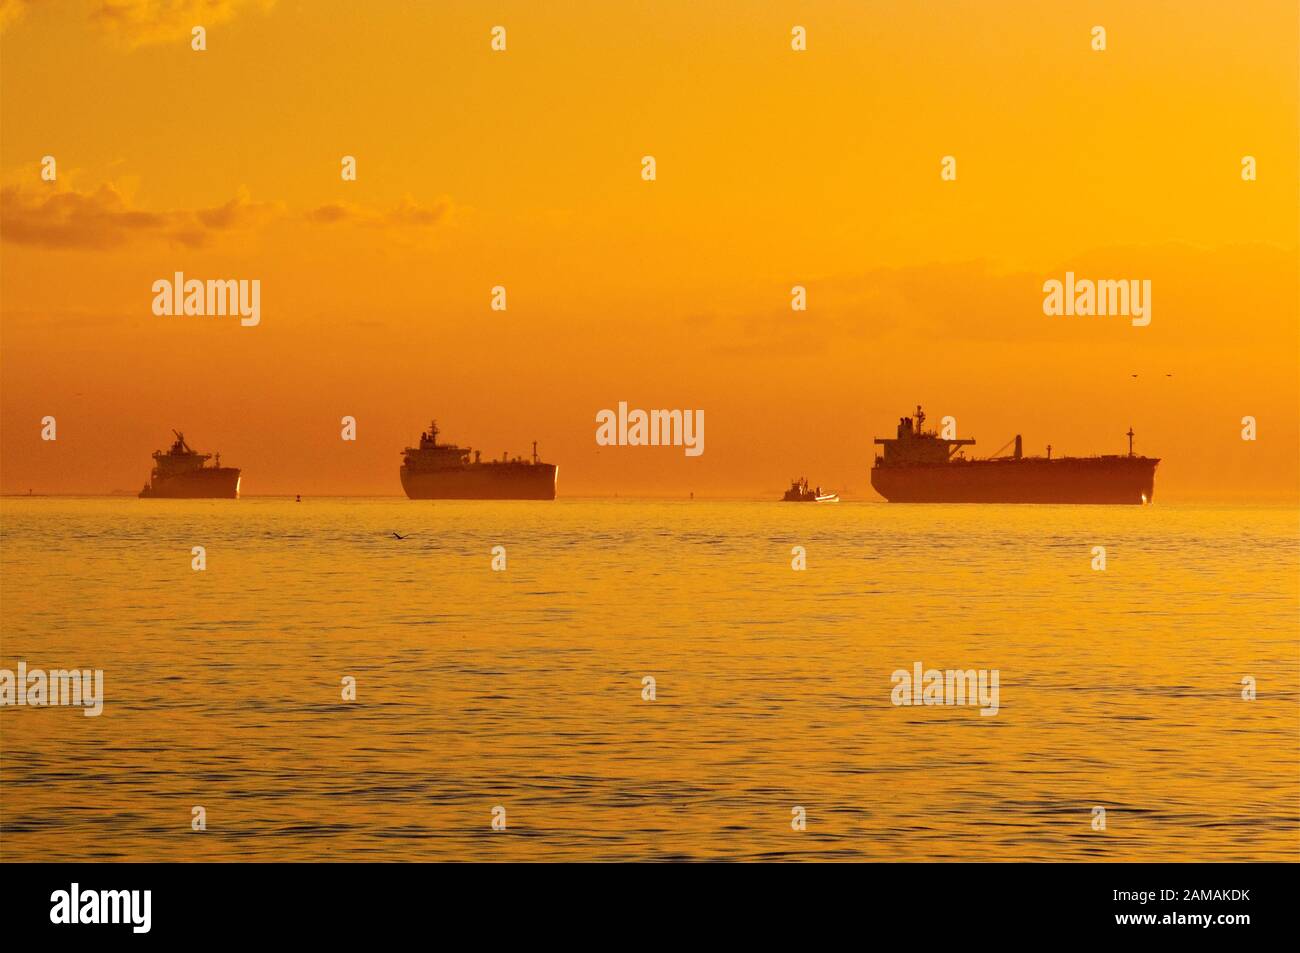 Ships waiting at anchor in Gulf of Mexico at sunrise, before entering Galveston Bay on their way to Port of Houston, Texas, USA Stock Photo